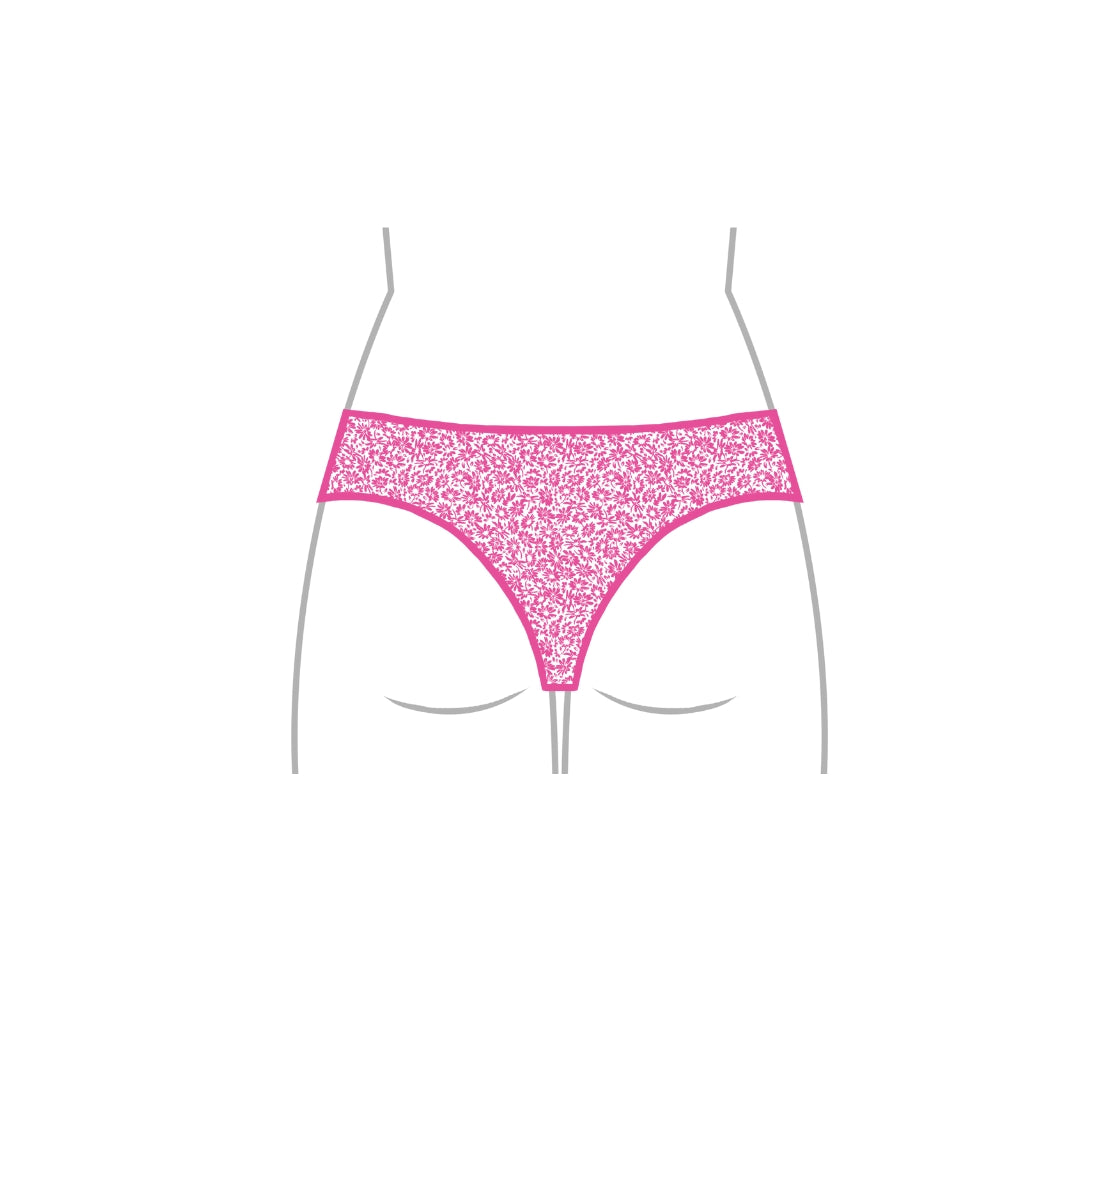 What is a Thong?, Guide to Thong Types